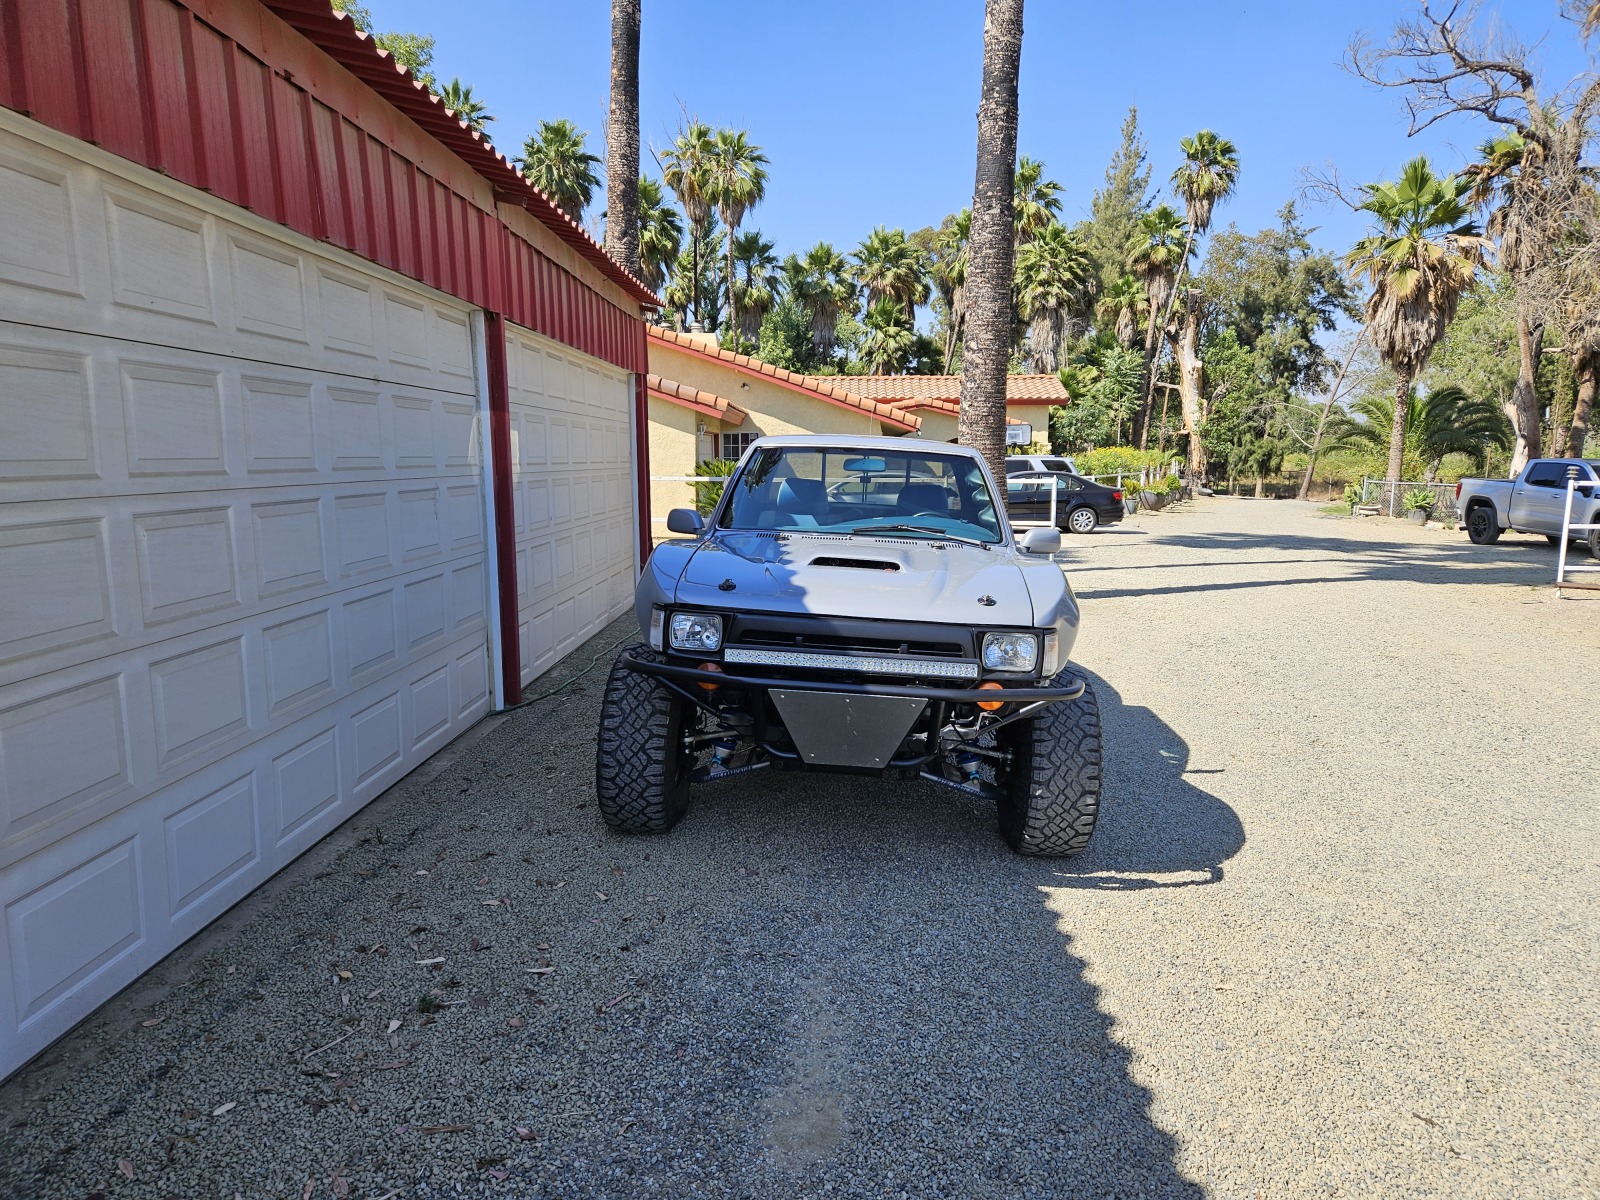 For Sale: 91 Toyota Pickup 4x4 Long Travel, 3.4 Swap Supercharger - photo1